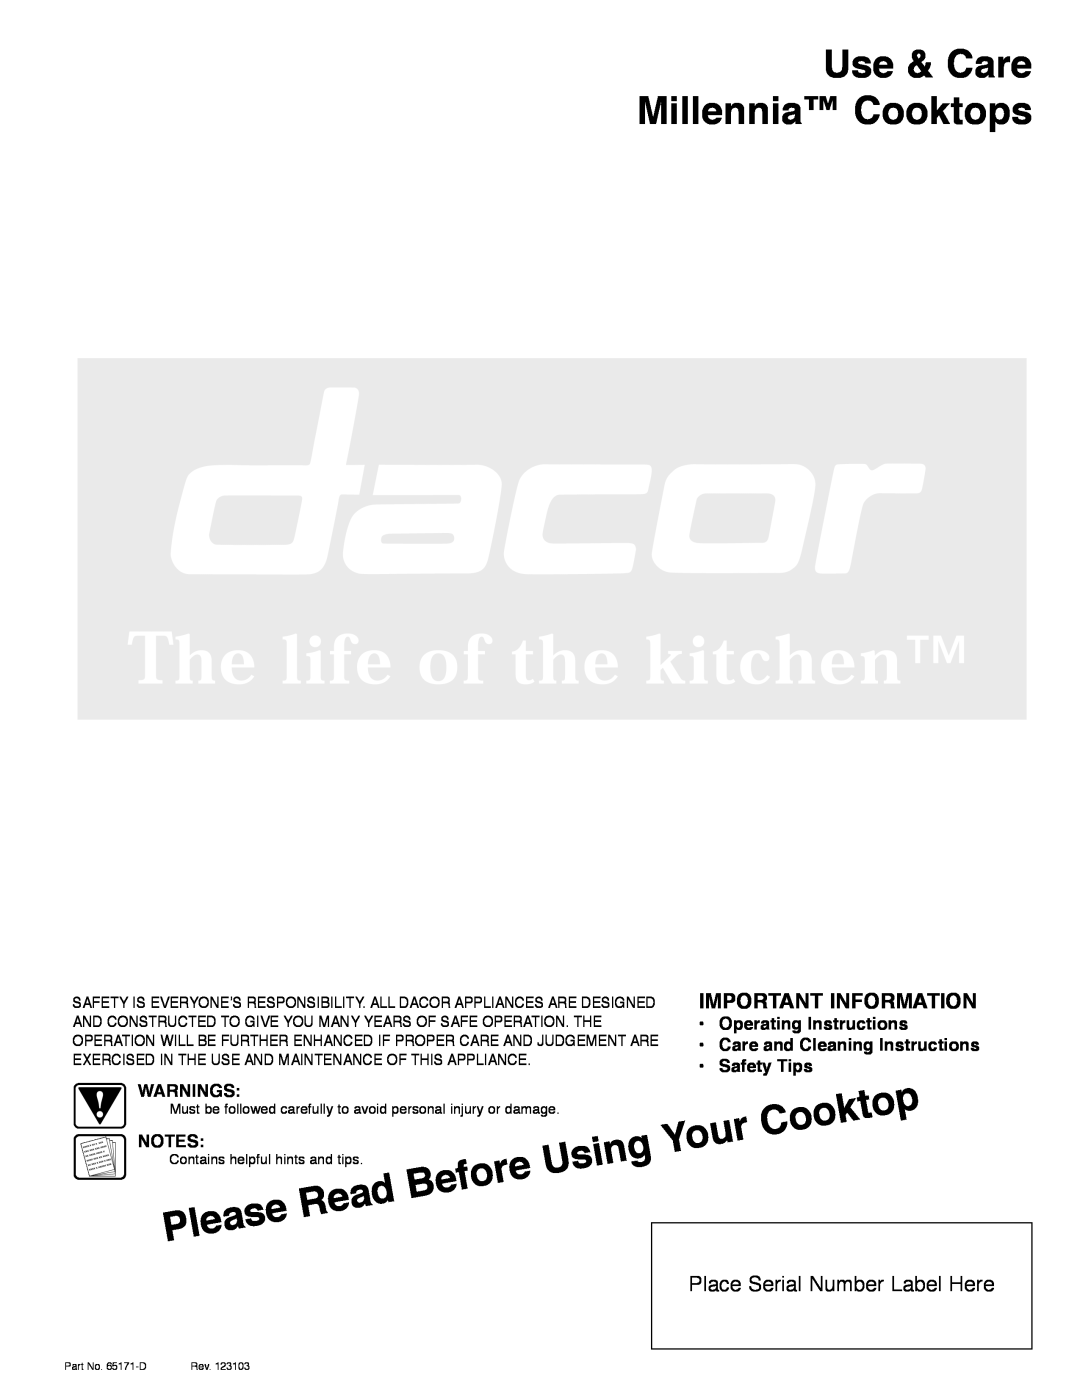 Dacor ETT304 manual Warnings, Operating Instructions Care and Cleaning Instructions Safety Tips, Important Information 